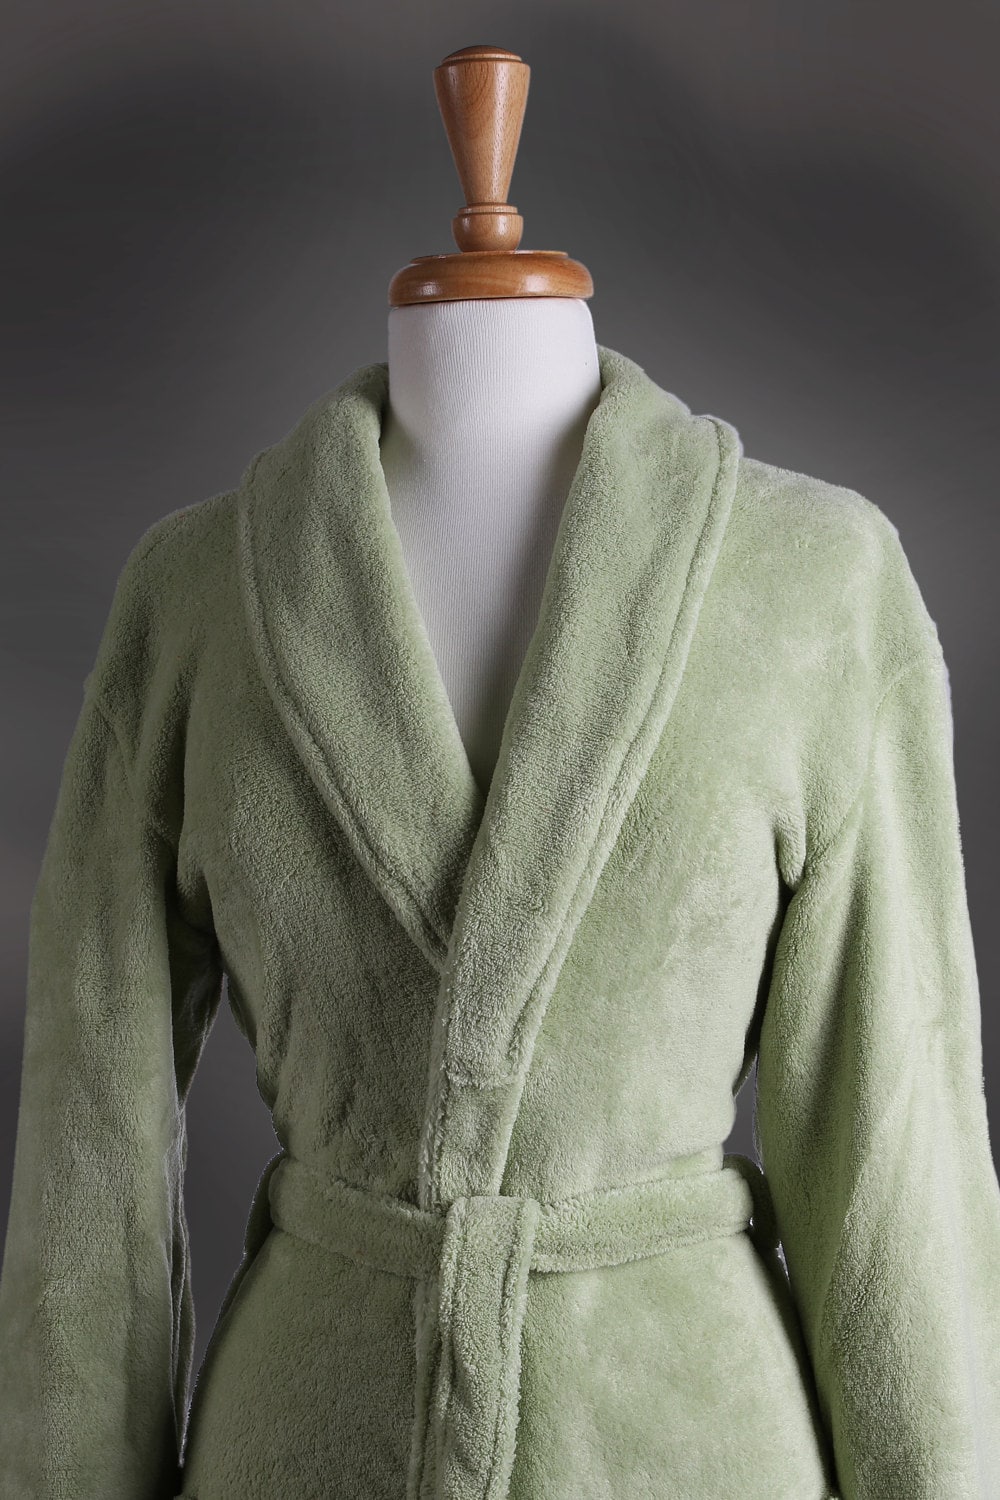 On Sale Plush Bathrobe Various Colors Available, Monogrammable ...